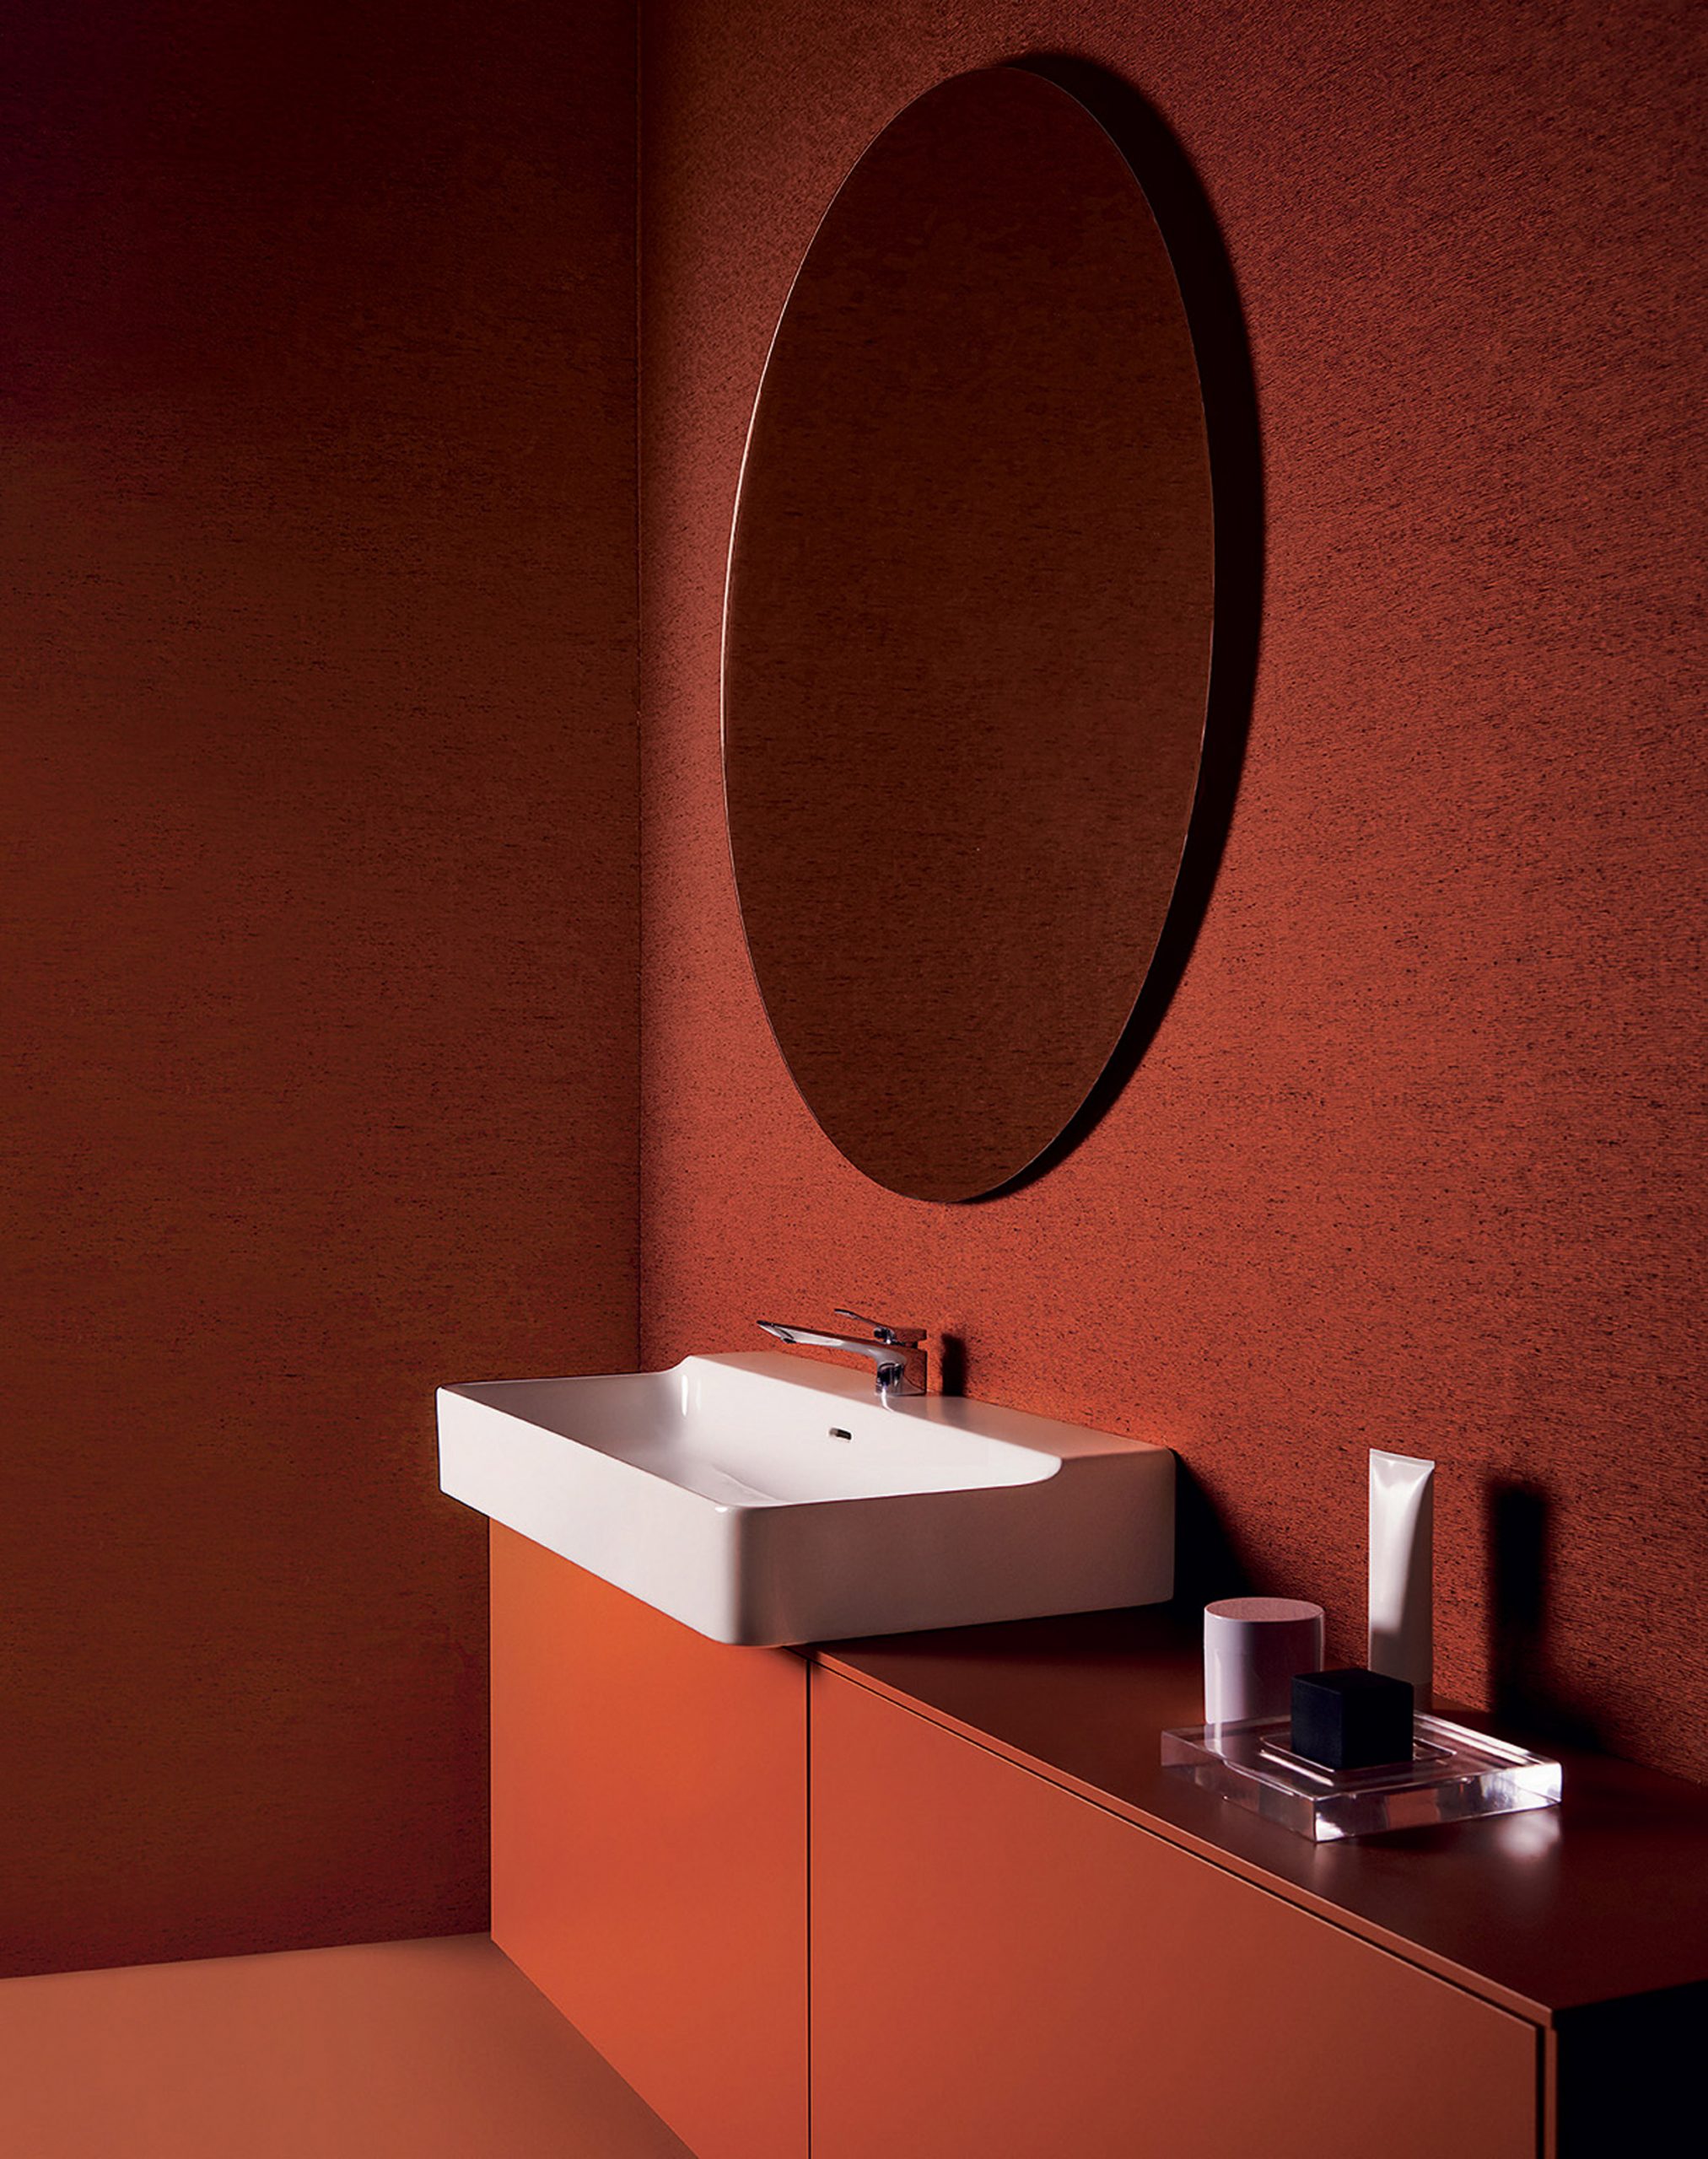 A washbasin and bathroom furniture by Ideal Standard